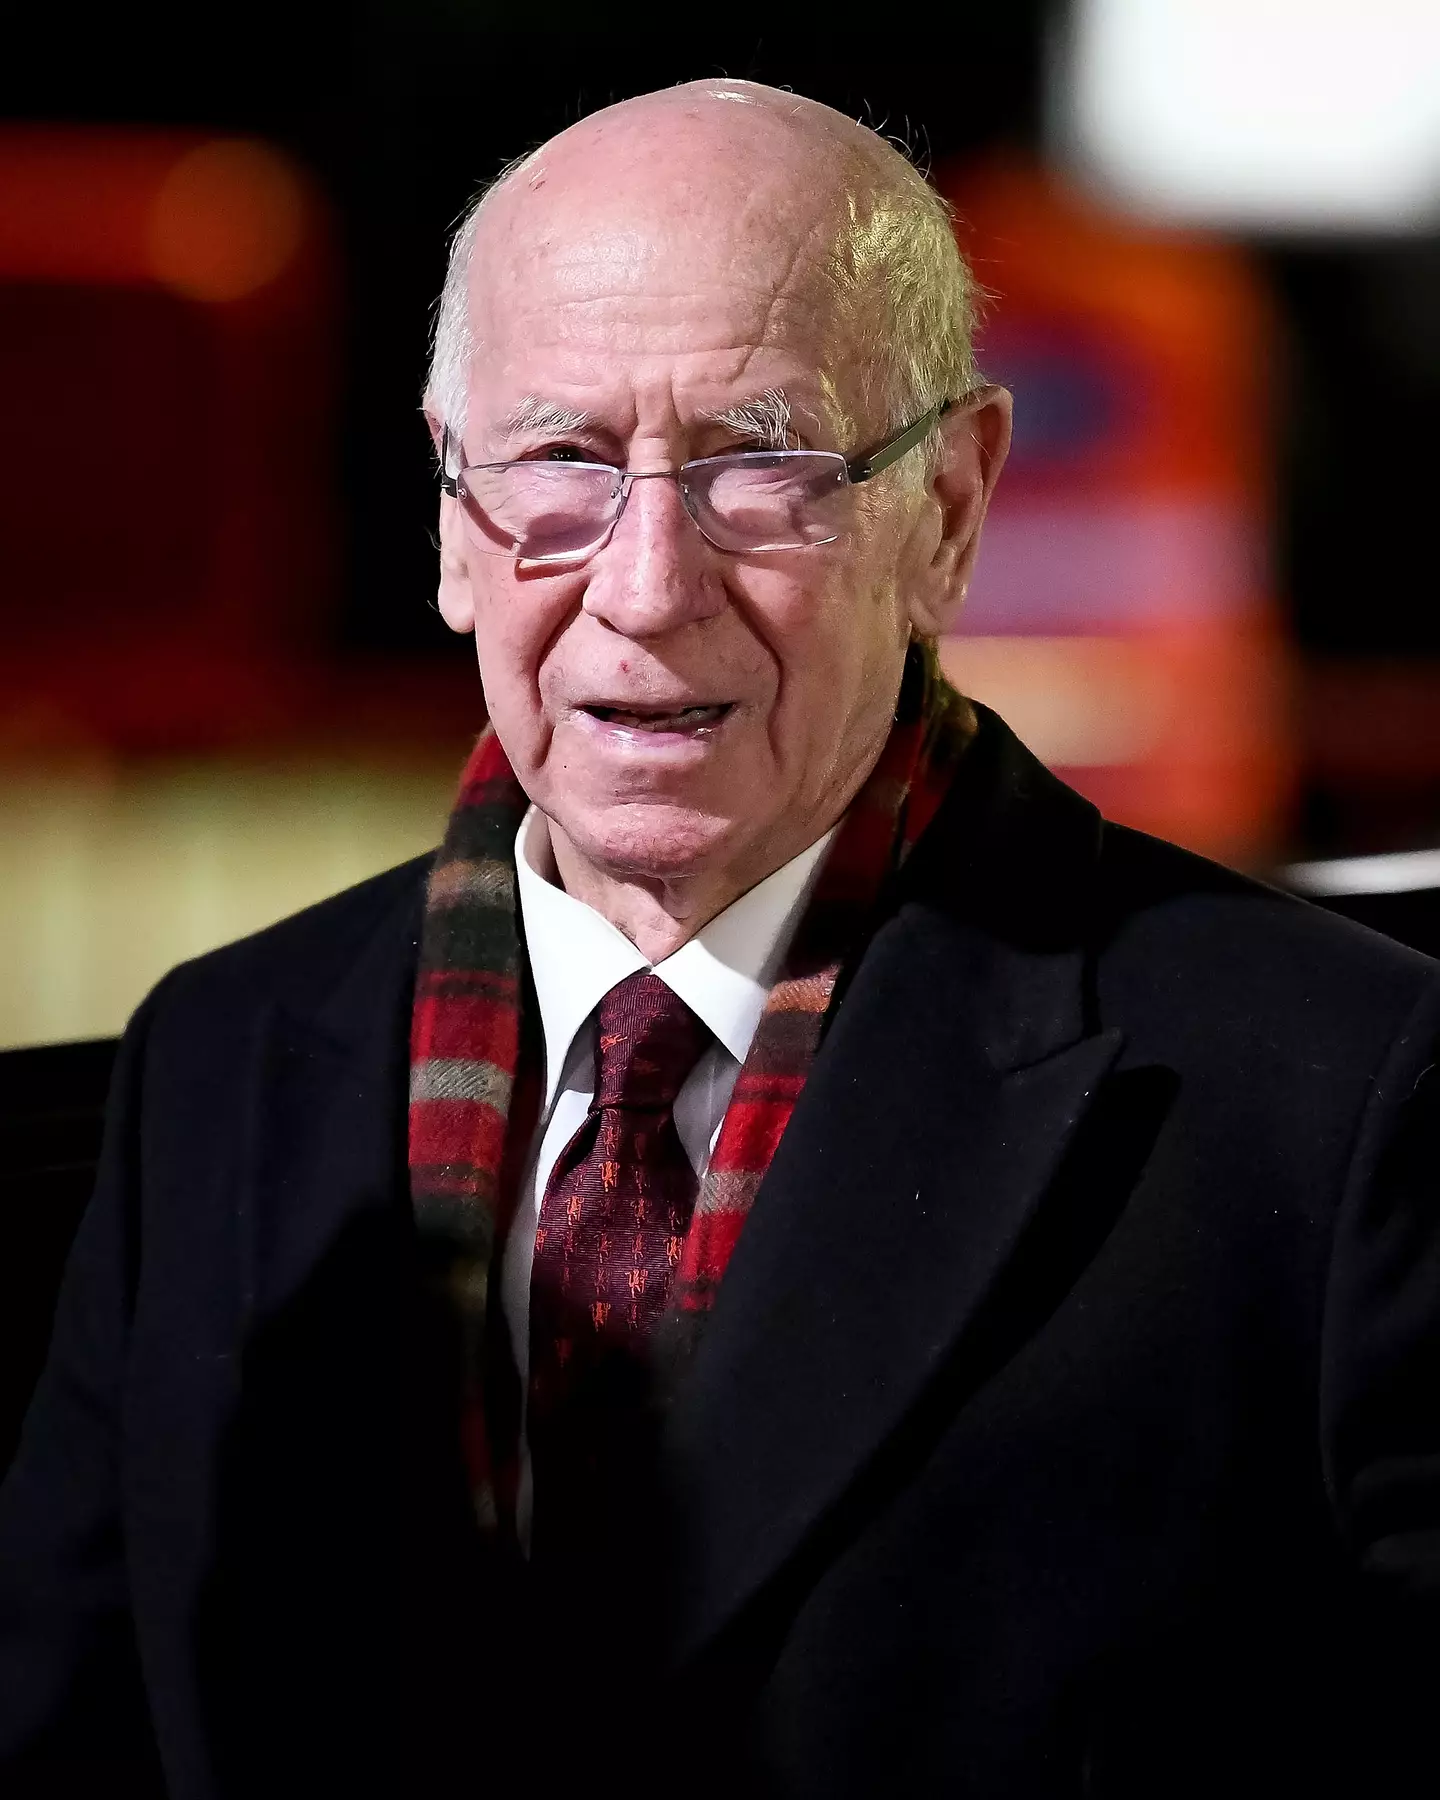 It was announced earlier today that Sir Bobby Charlton had died in the early hours of Saturday.